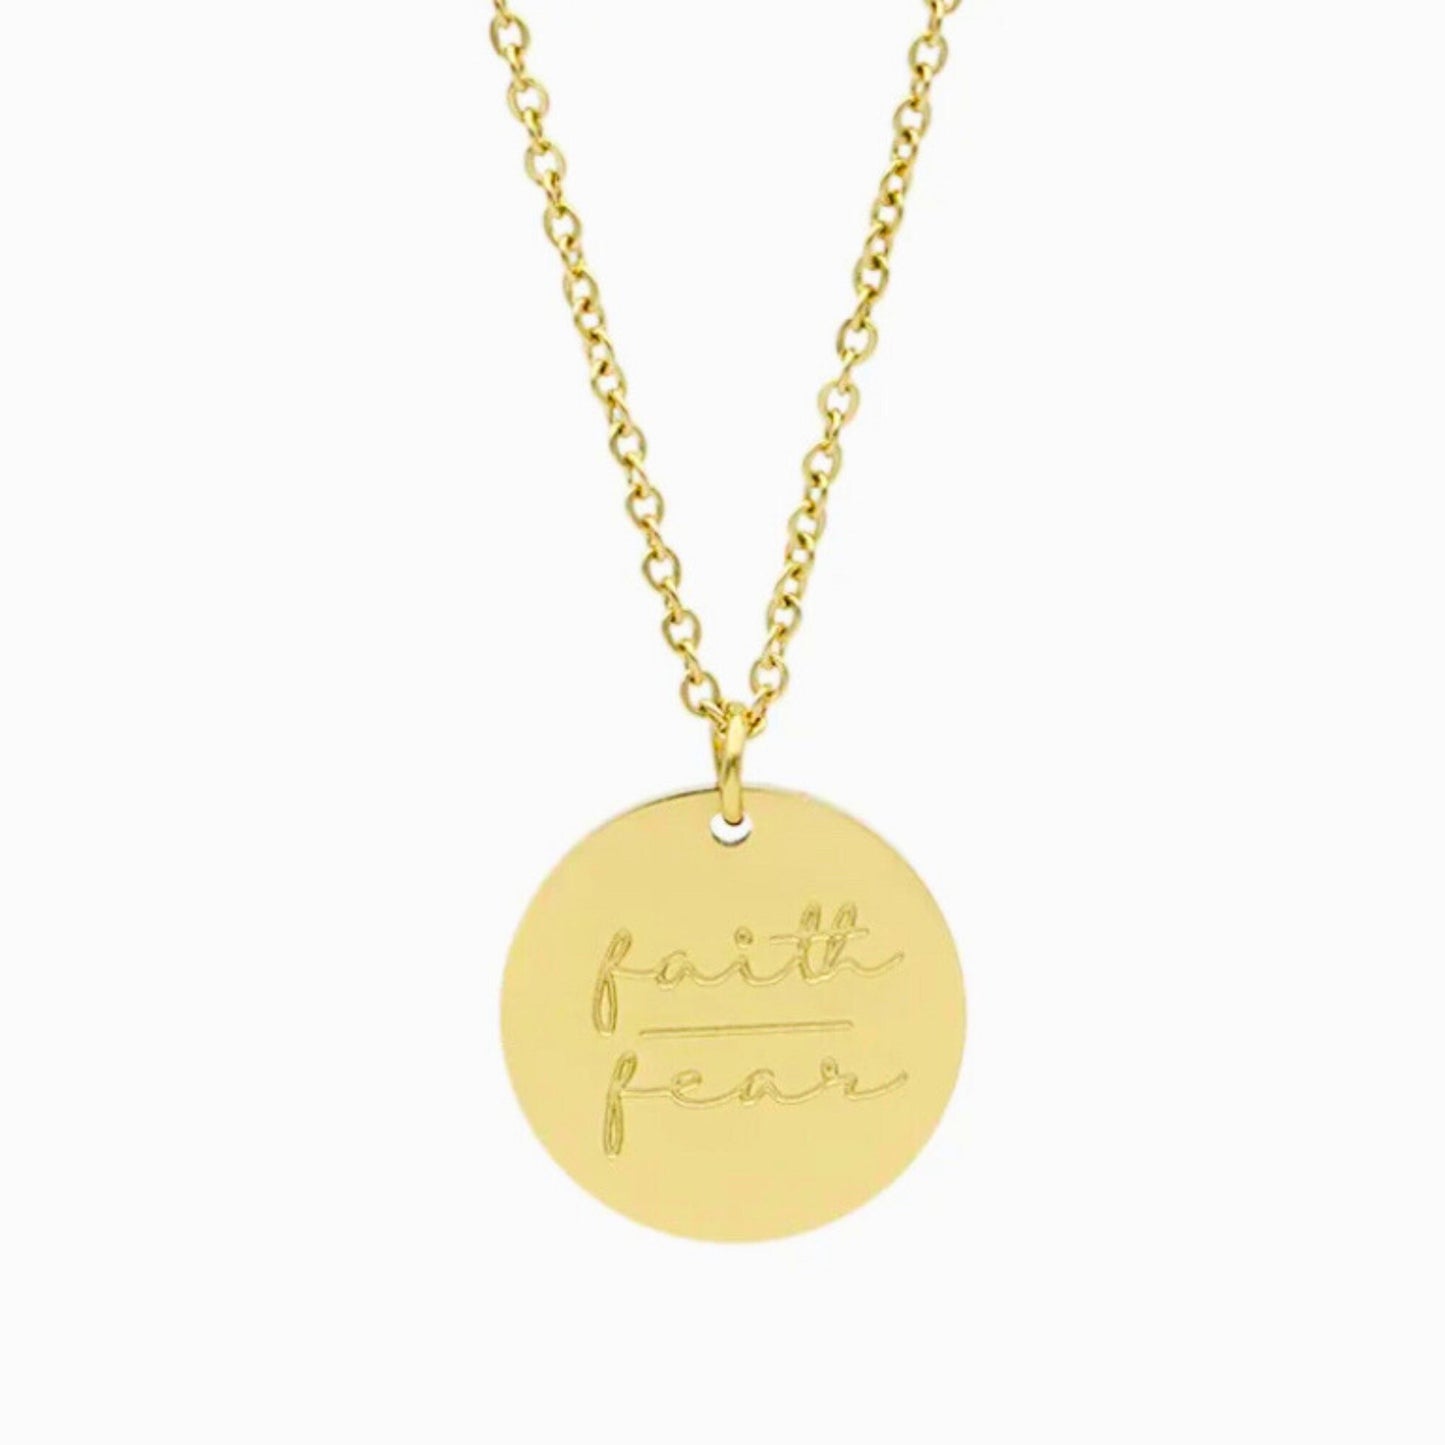 Faith over fear necklace, motivational jewelry,faith necklace,positive quote necklace,meaningful gift